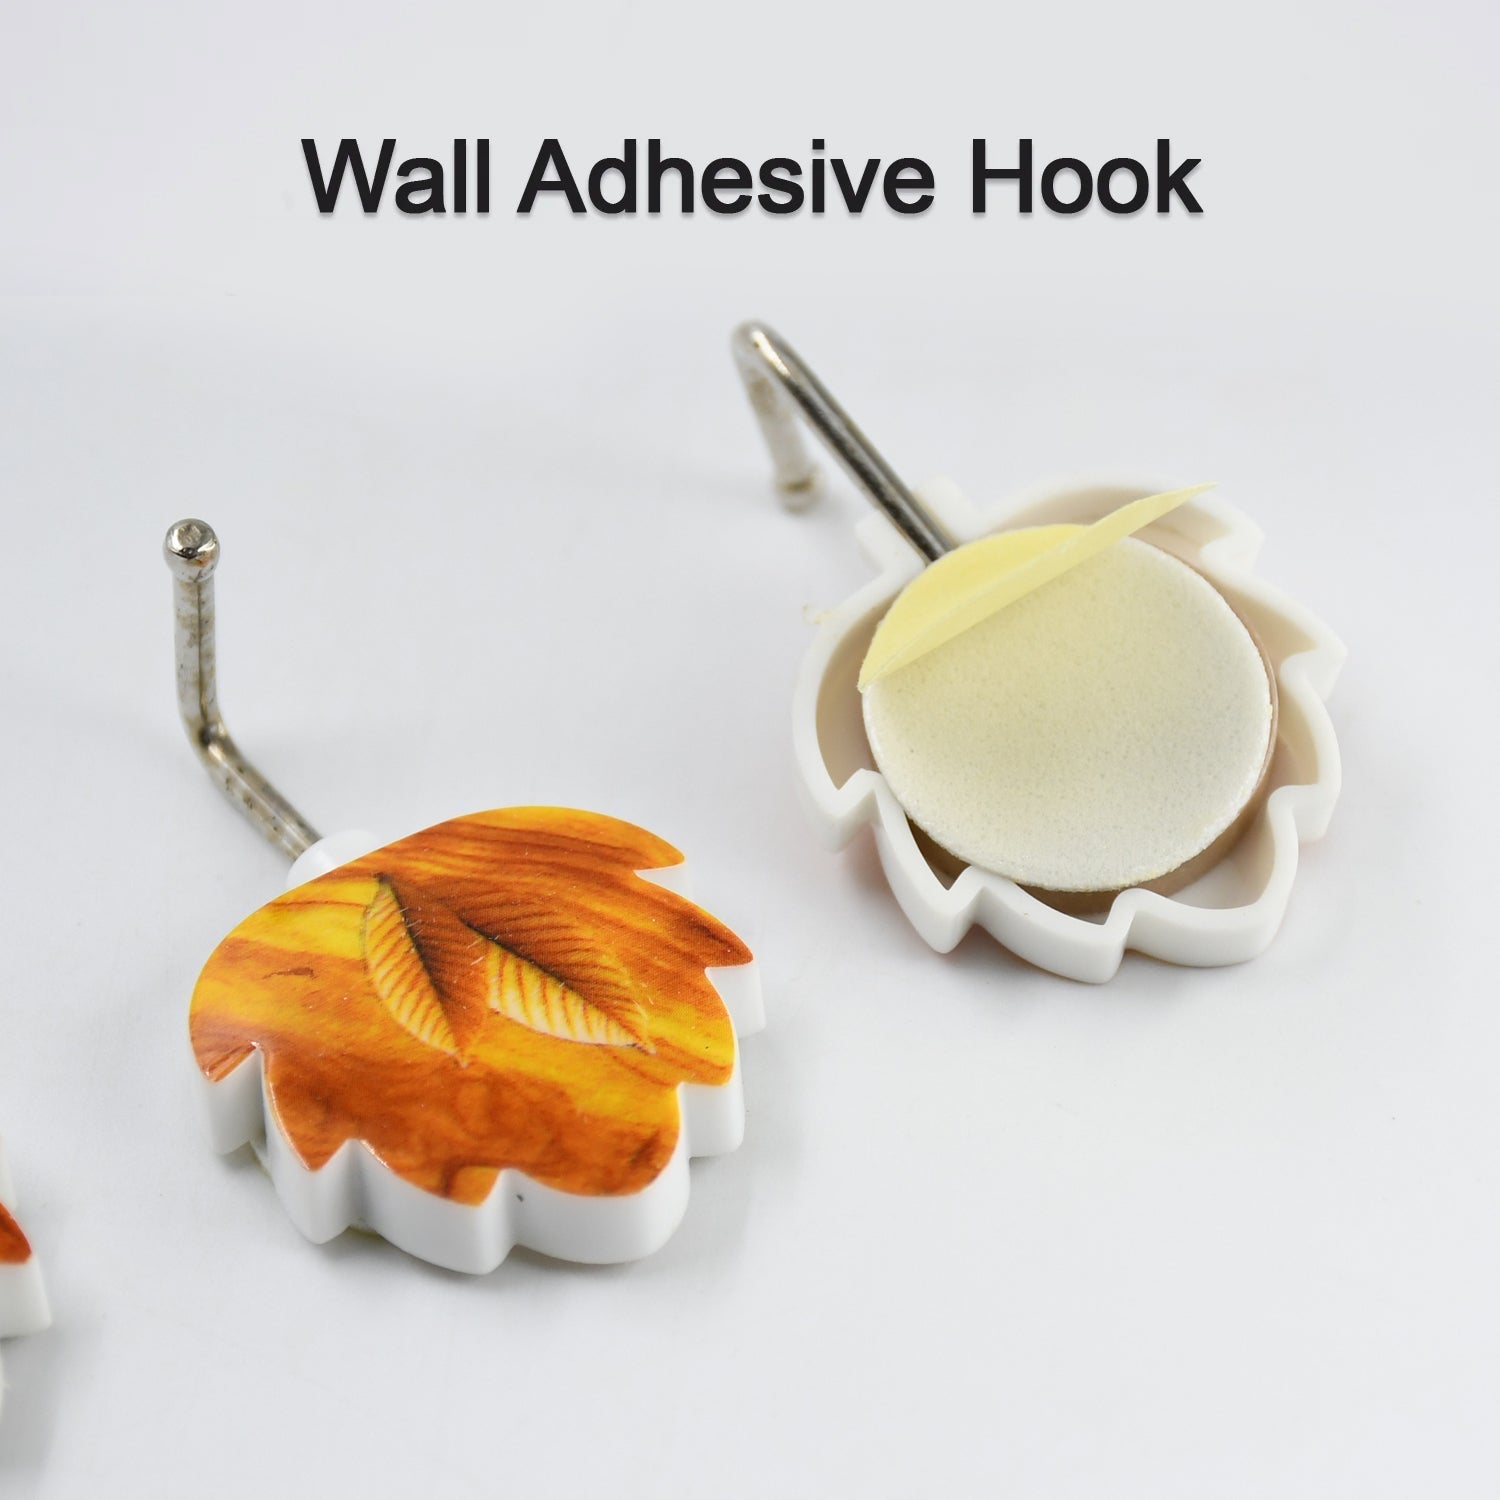 4585 Leaf Shape Hook Strong Adhesive Hook Use For Home Decor , Office & Multi Use Hook (3pc). DeoDap